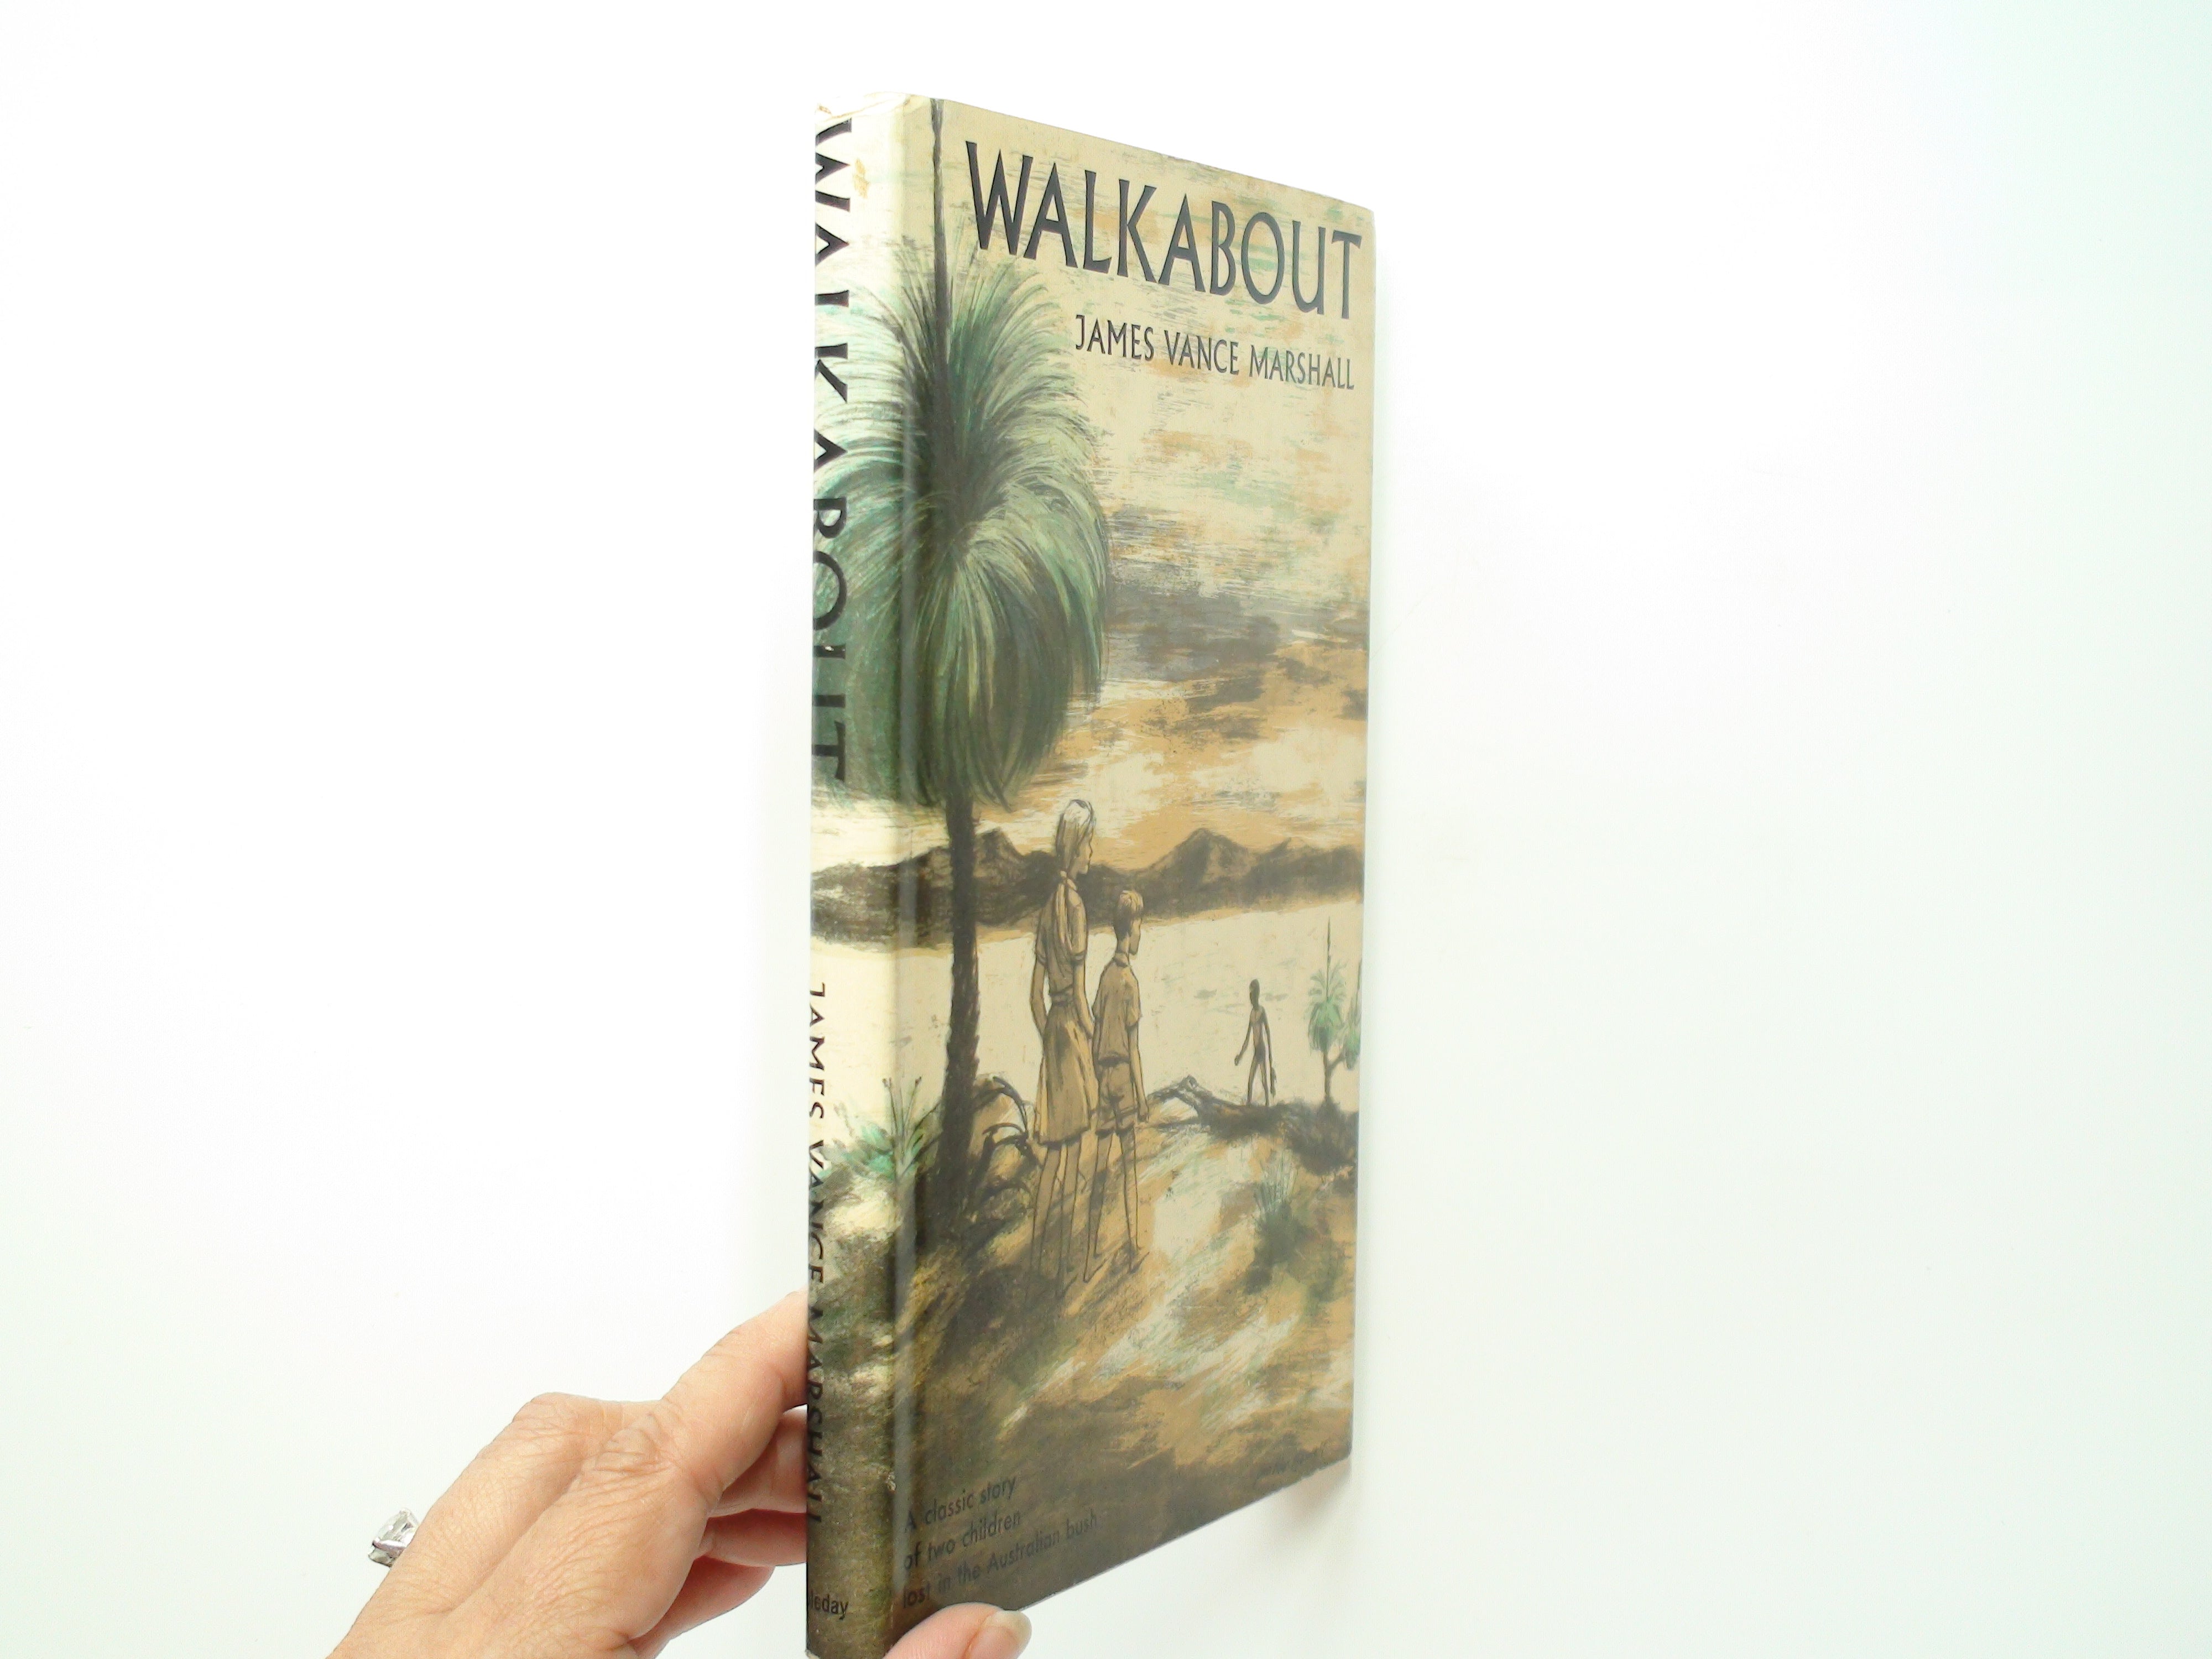 Walkabout by James Vance Marshall, Illustrated by Noela Young, with D/J, 1961